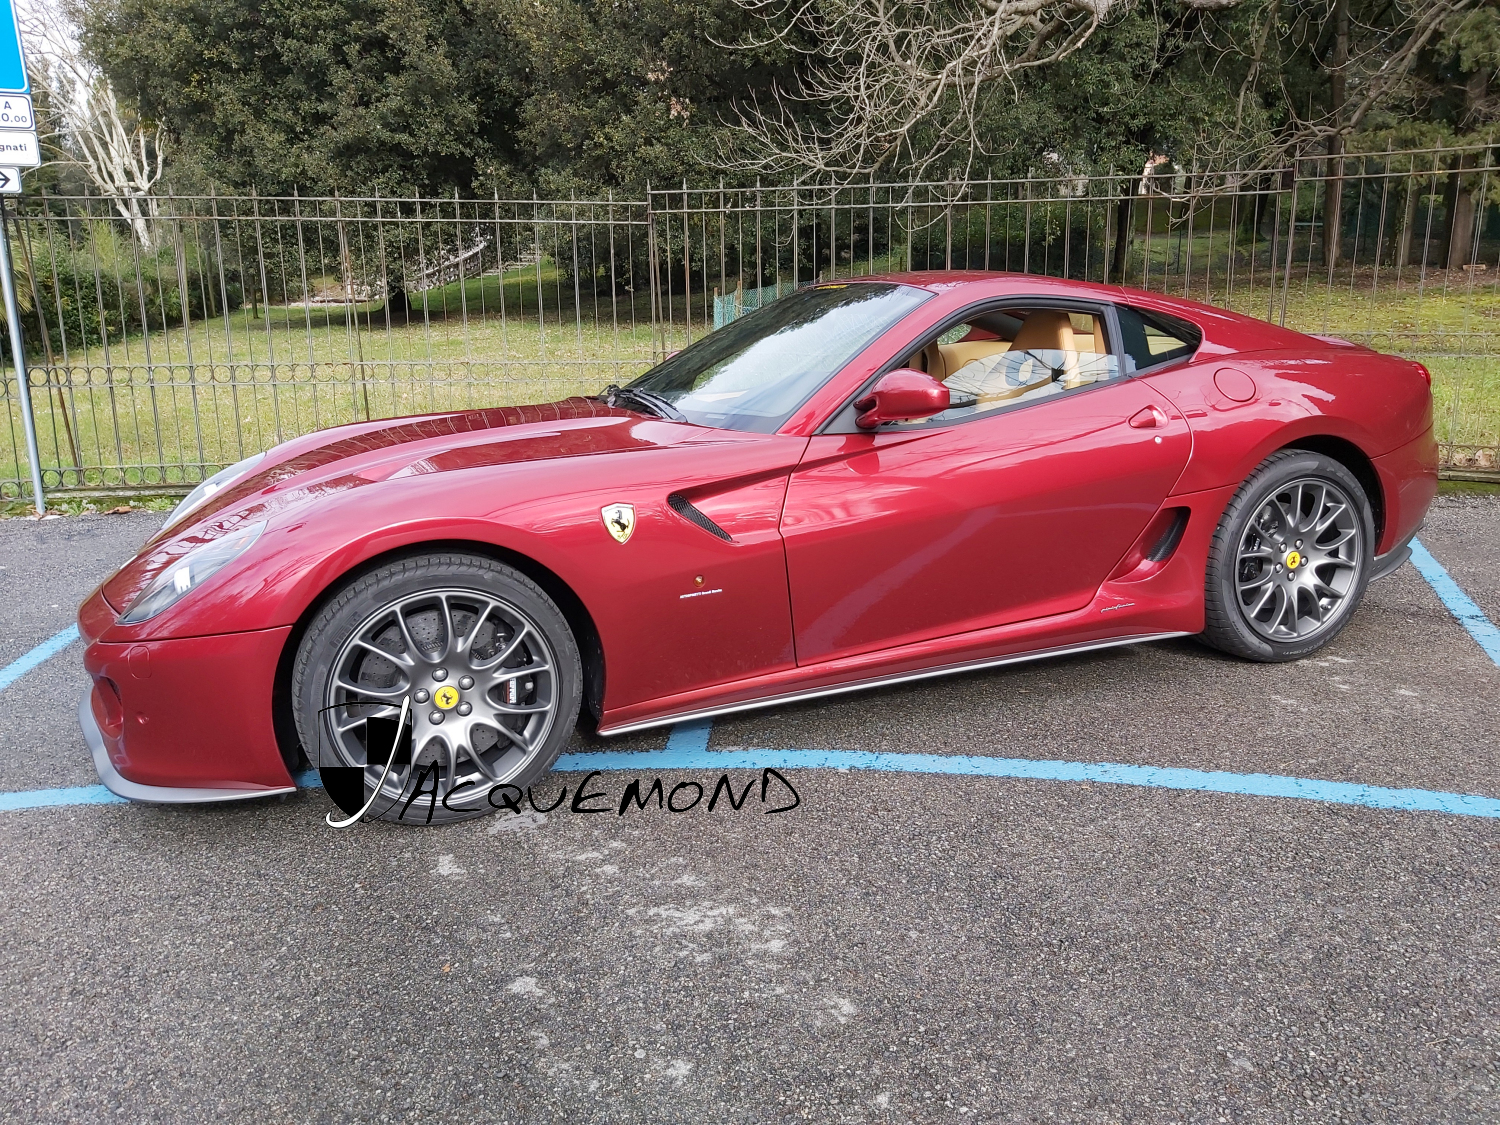 Ferrari 599 GTO style side skirts by Jacquemond